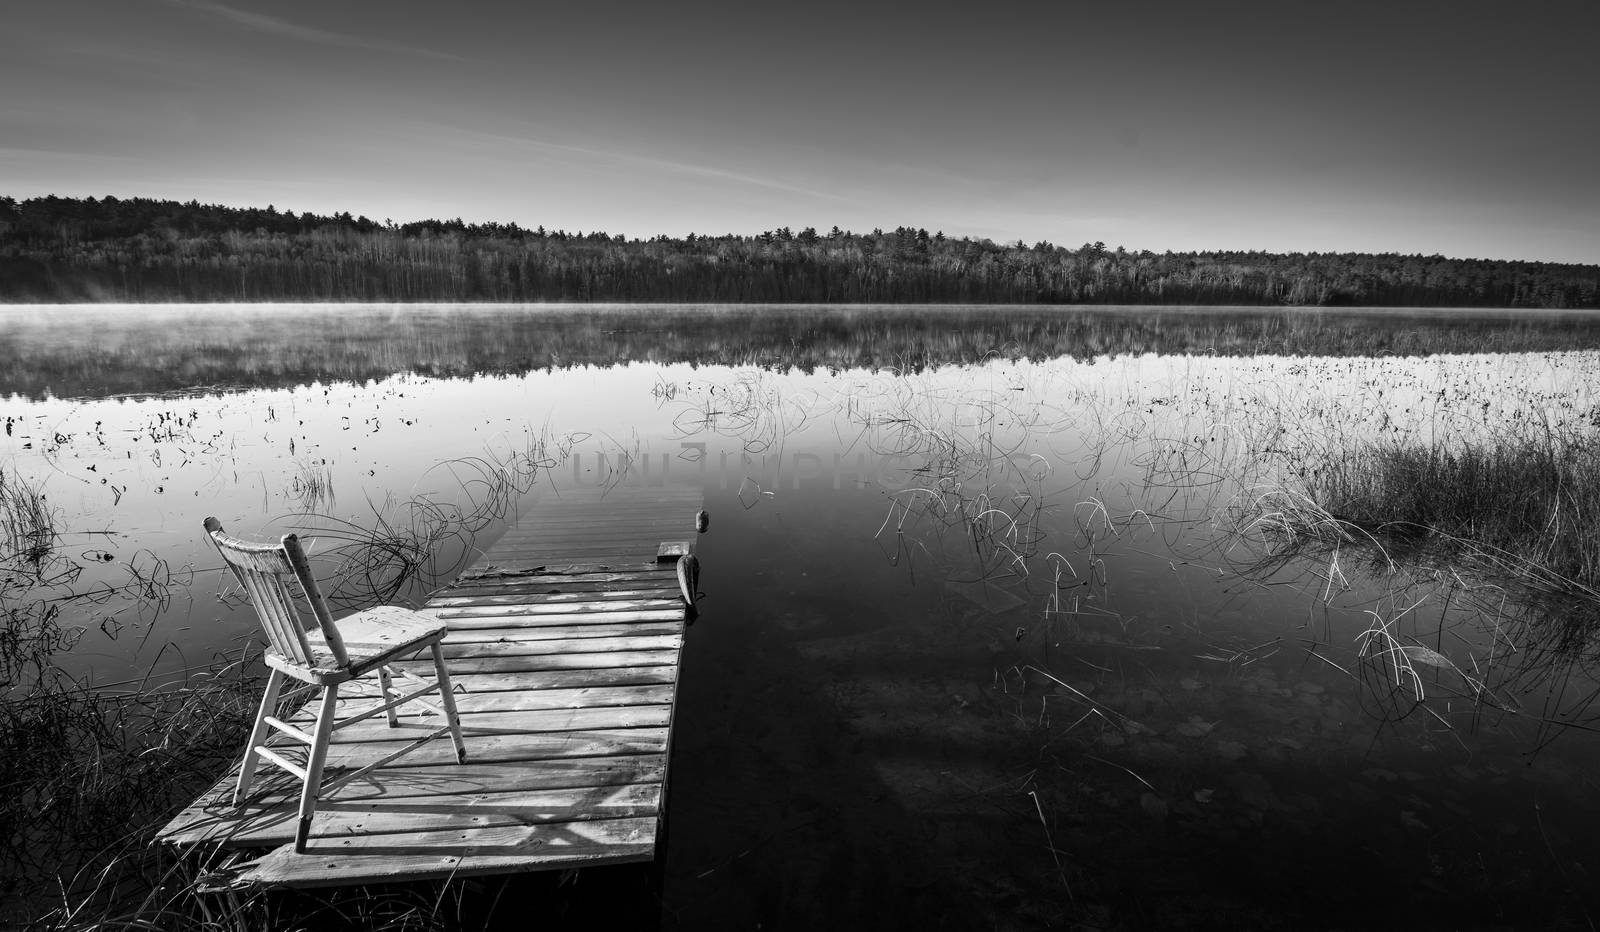 Morning sun rises from behind.  mild fog on the water, chair sits on a partially submerged dock at the edge of a lake in Ontario, Canada.